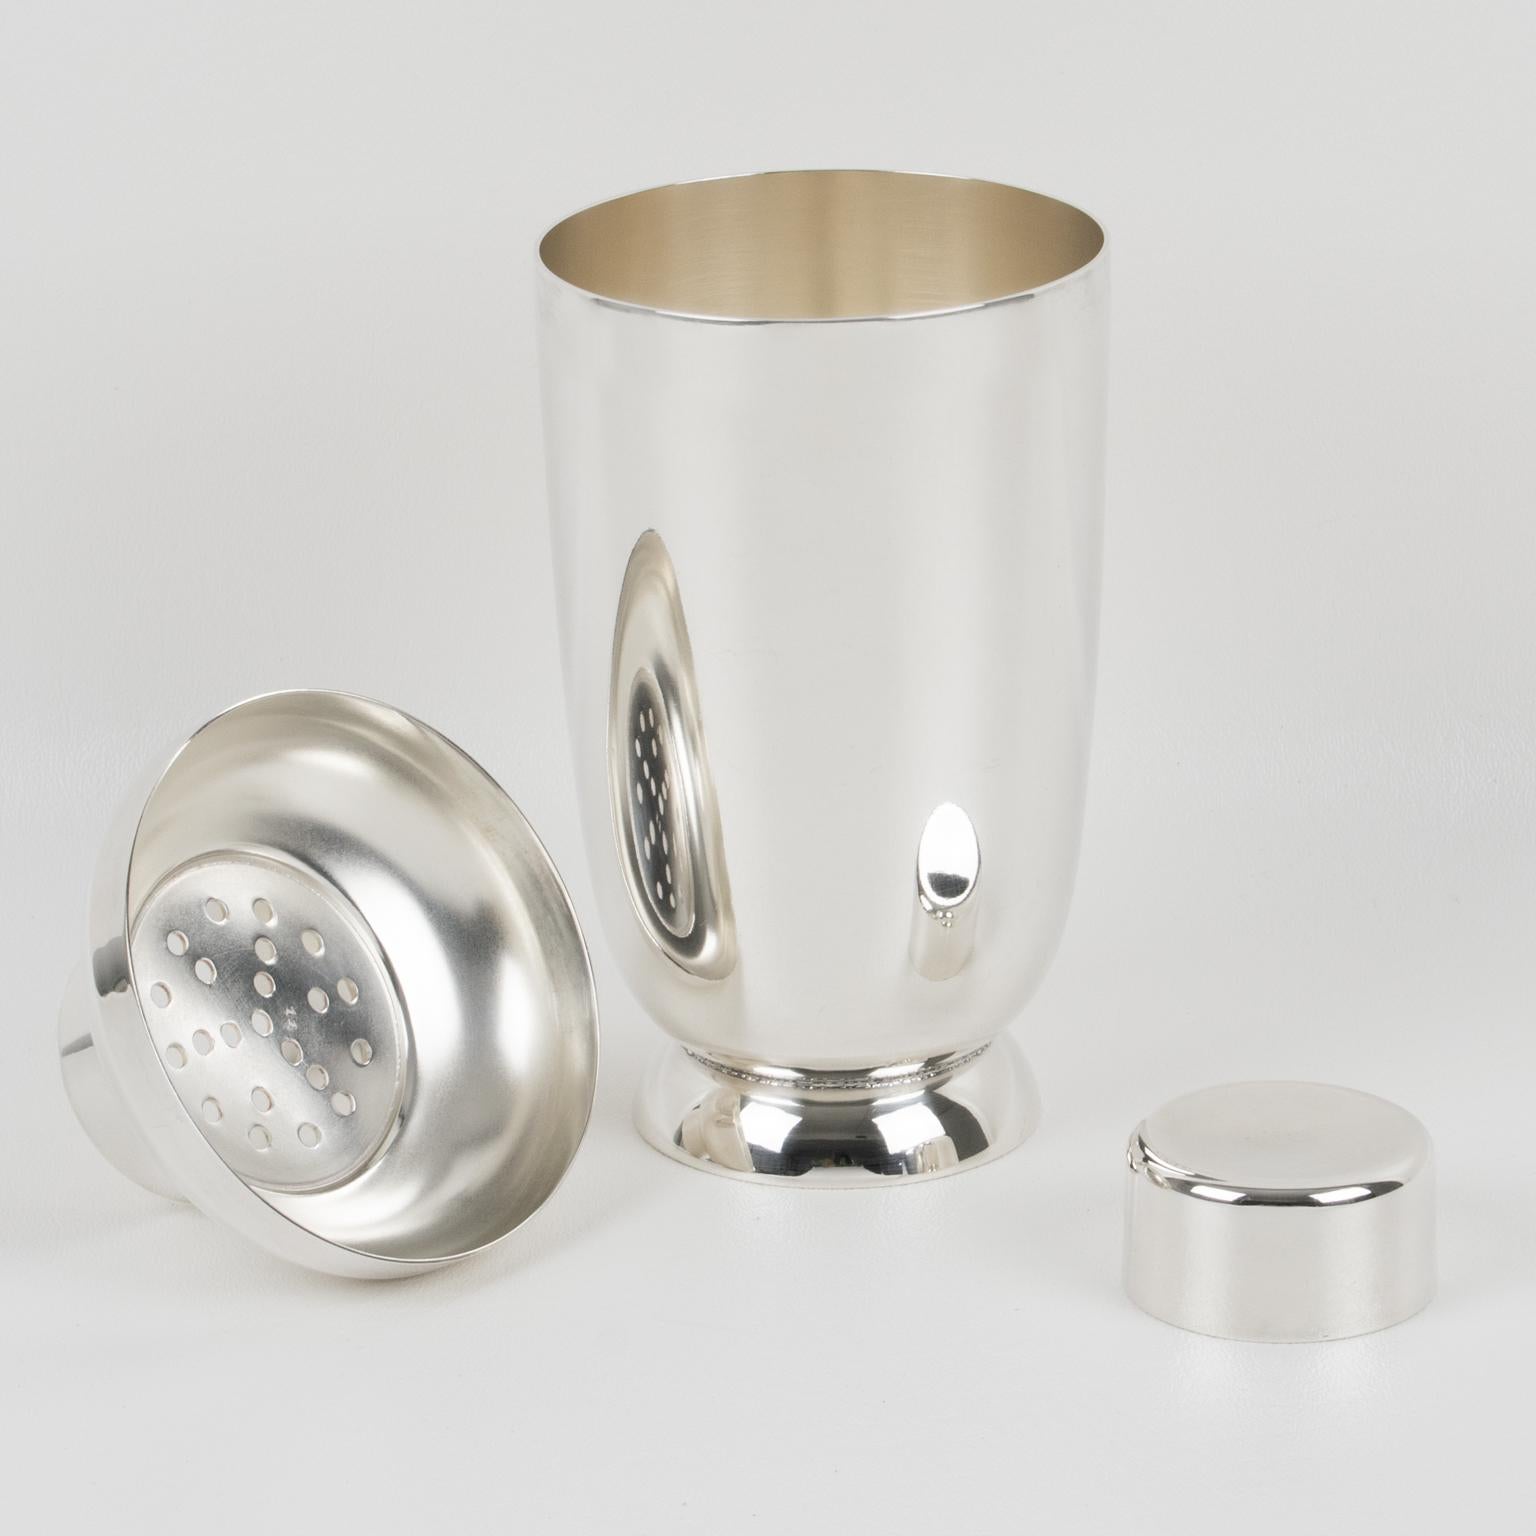 French Art Deco Silver Plate Cocktail Shaker by Gallia France